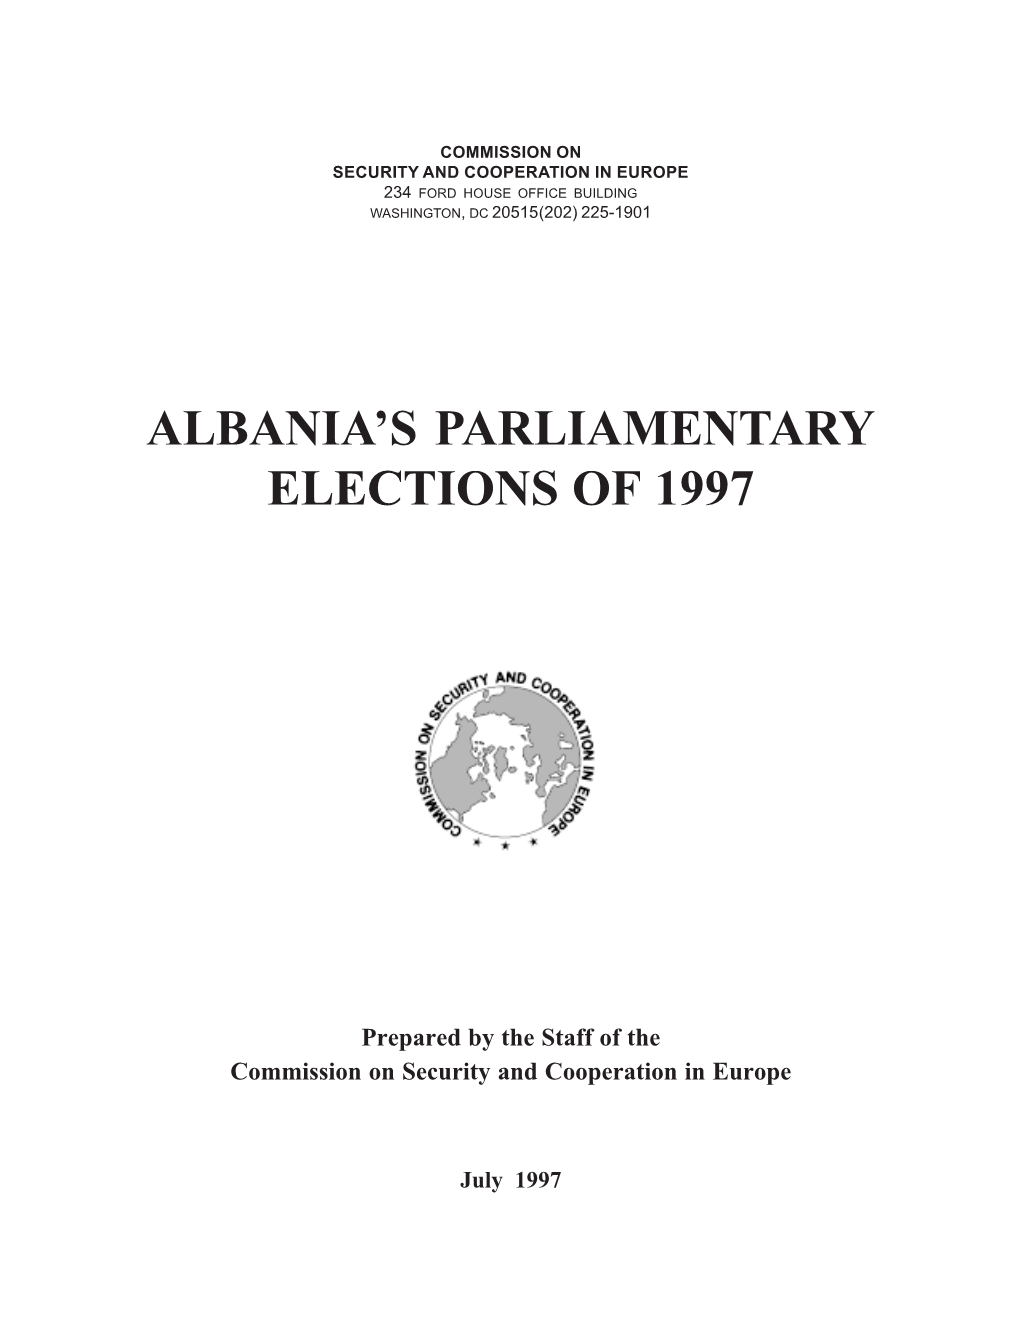 CSCE Report on Albania's Parliamentary Elections of 1997